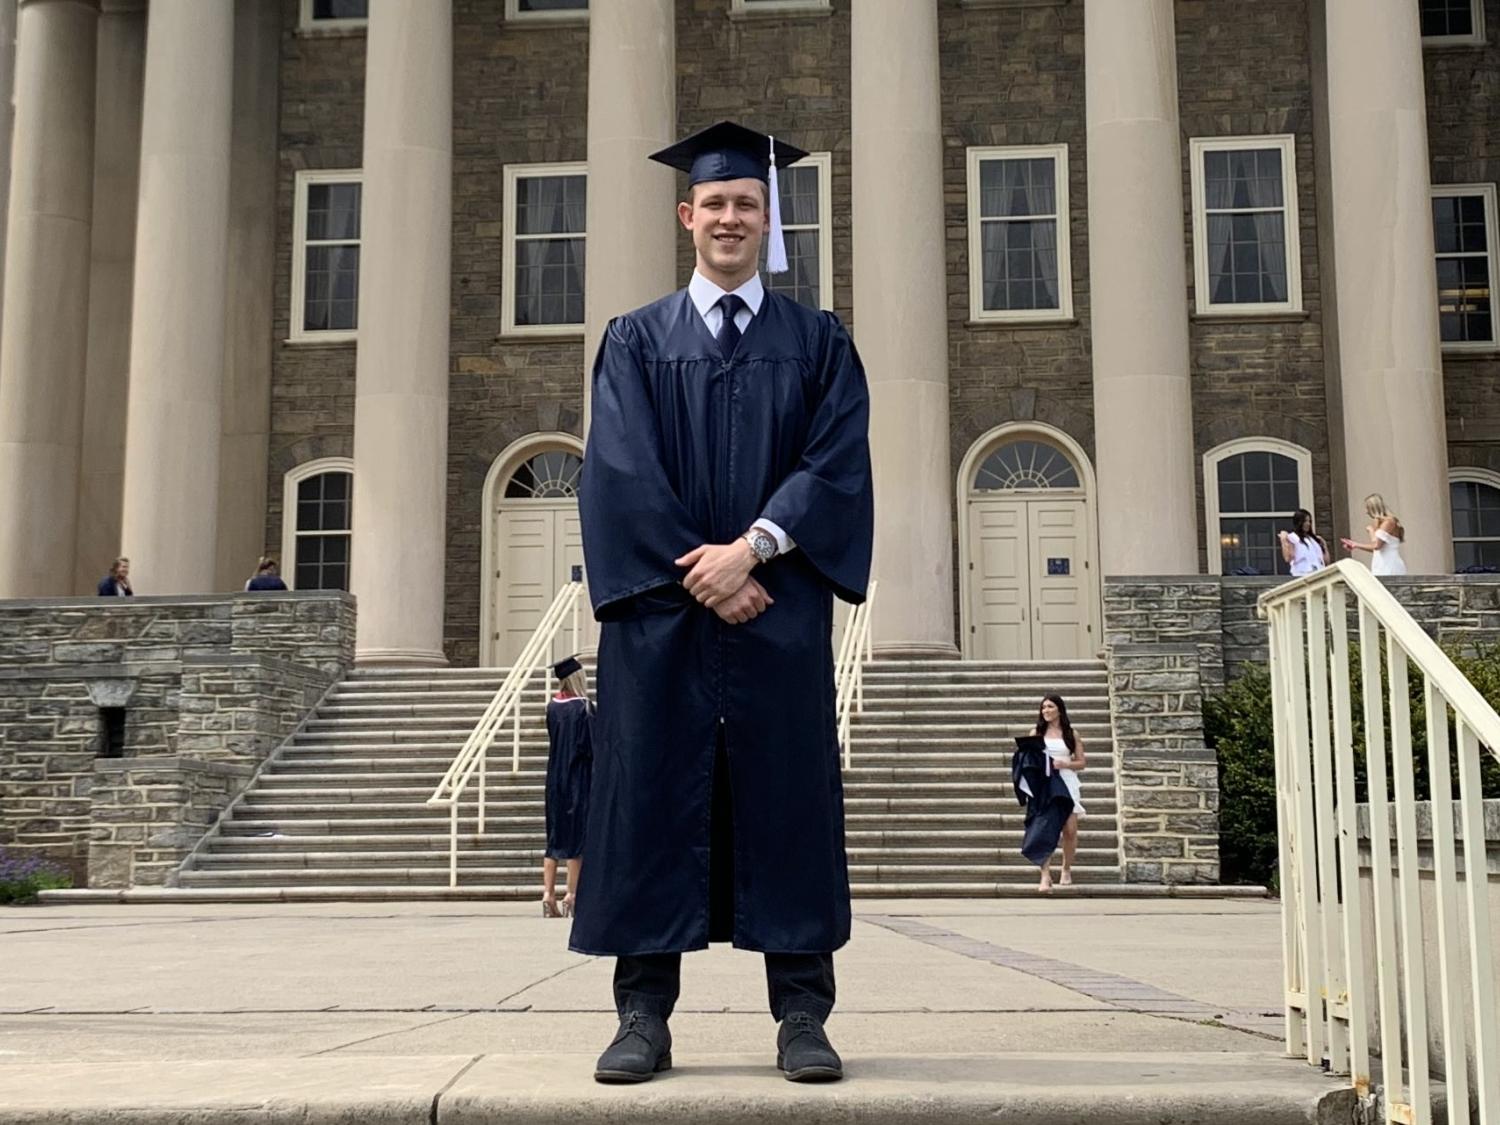 Overcoming homelessness and hardships to earn a Penn State degree